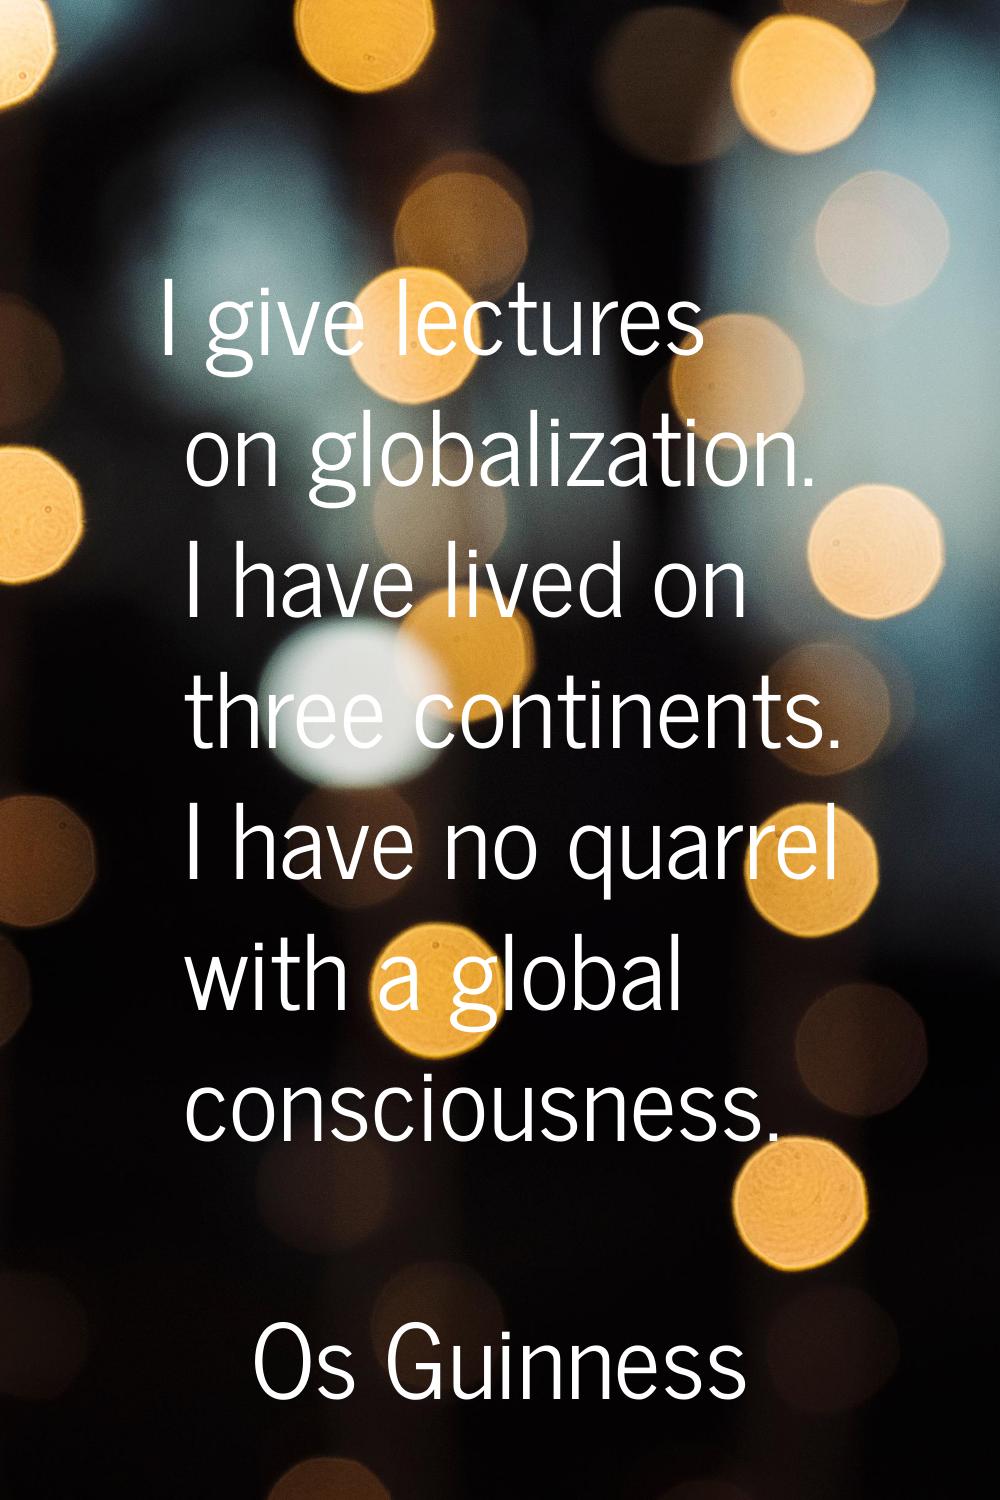 I give lectures on globalization. I have lived on three continents. I have no quarrel with a global